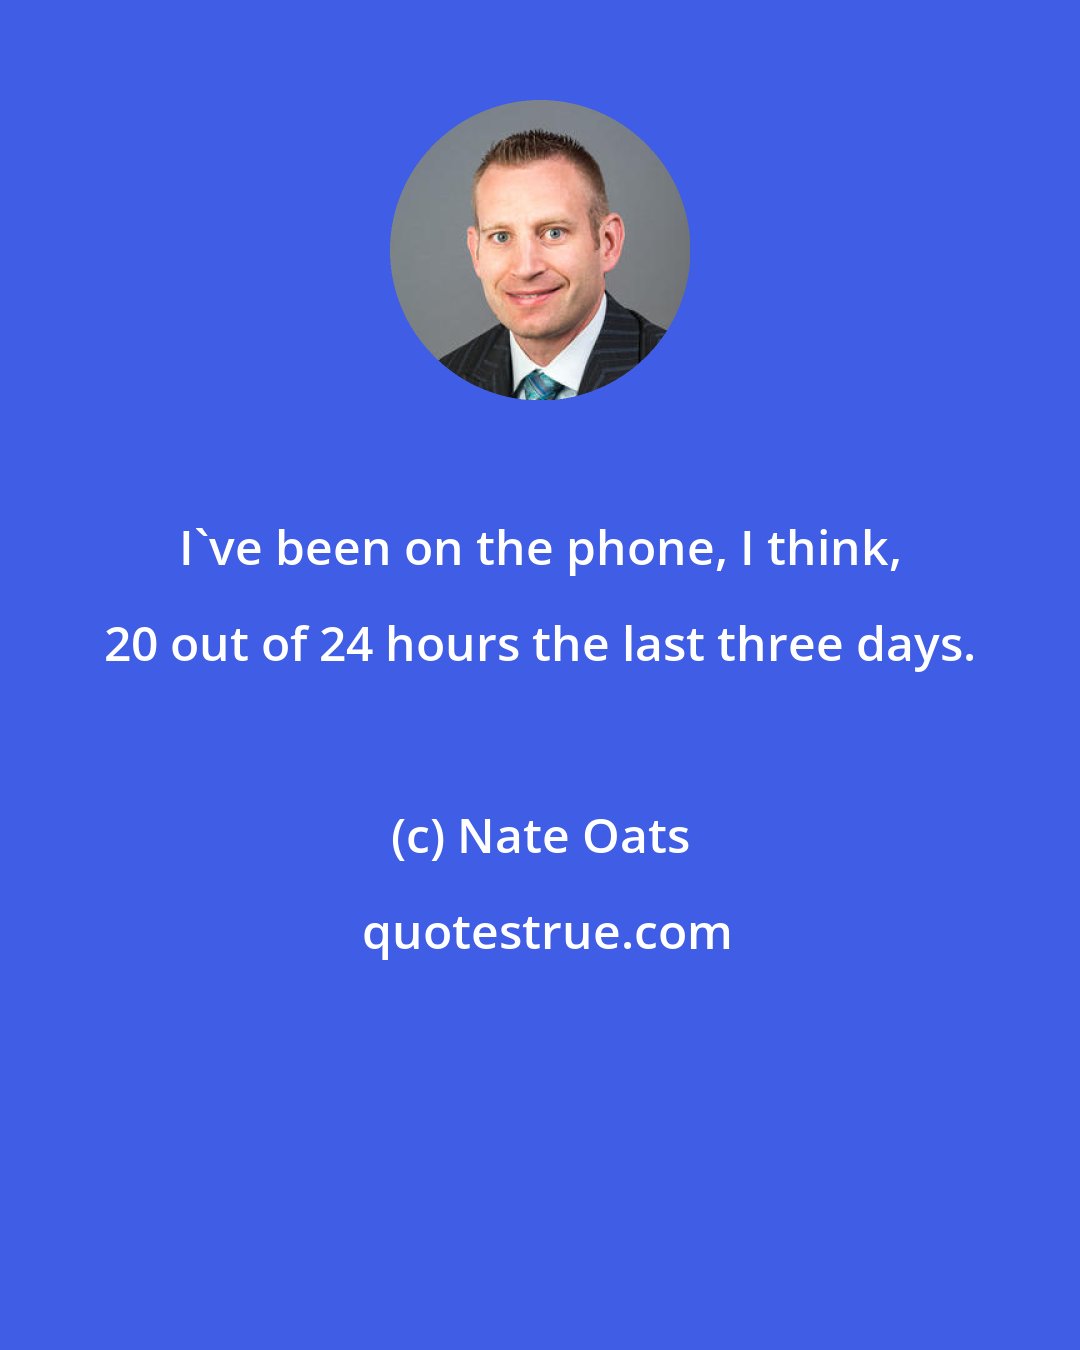 Nate Oats: I've been on the phone, I think, 20 out of 24 hours the last three days.